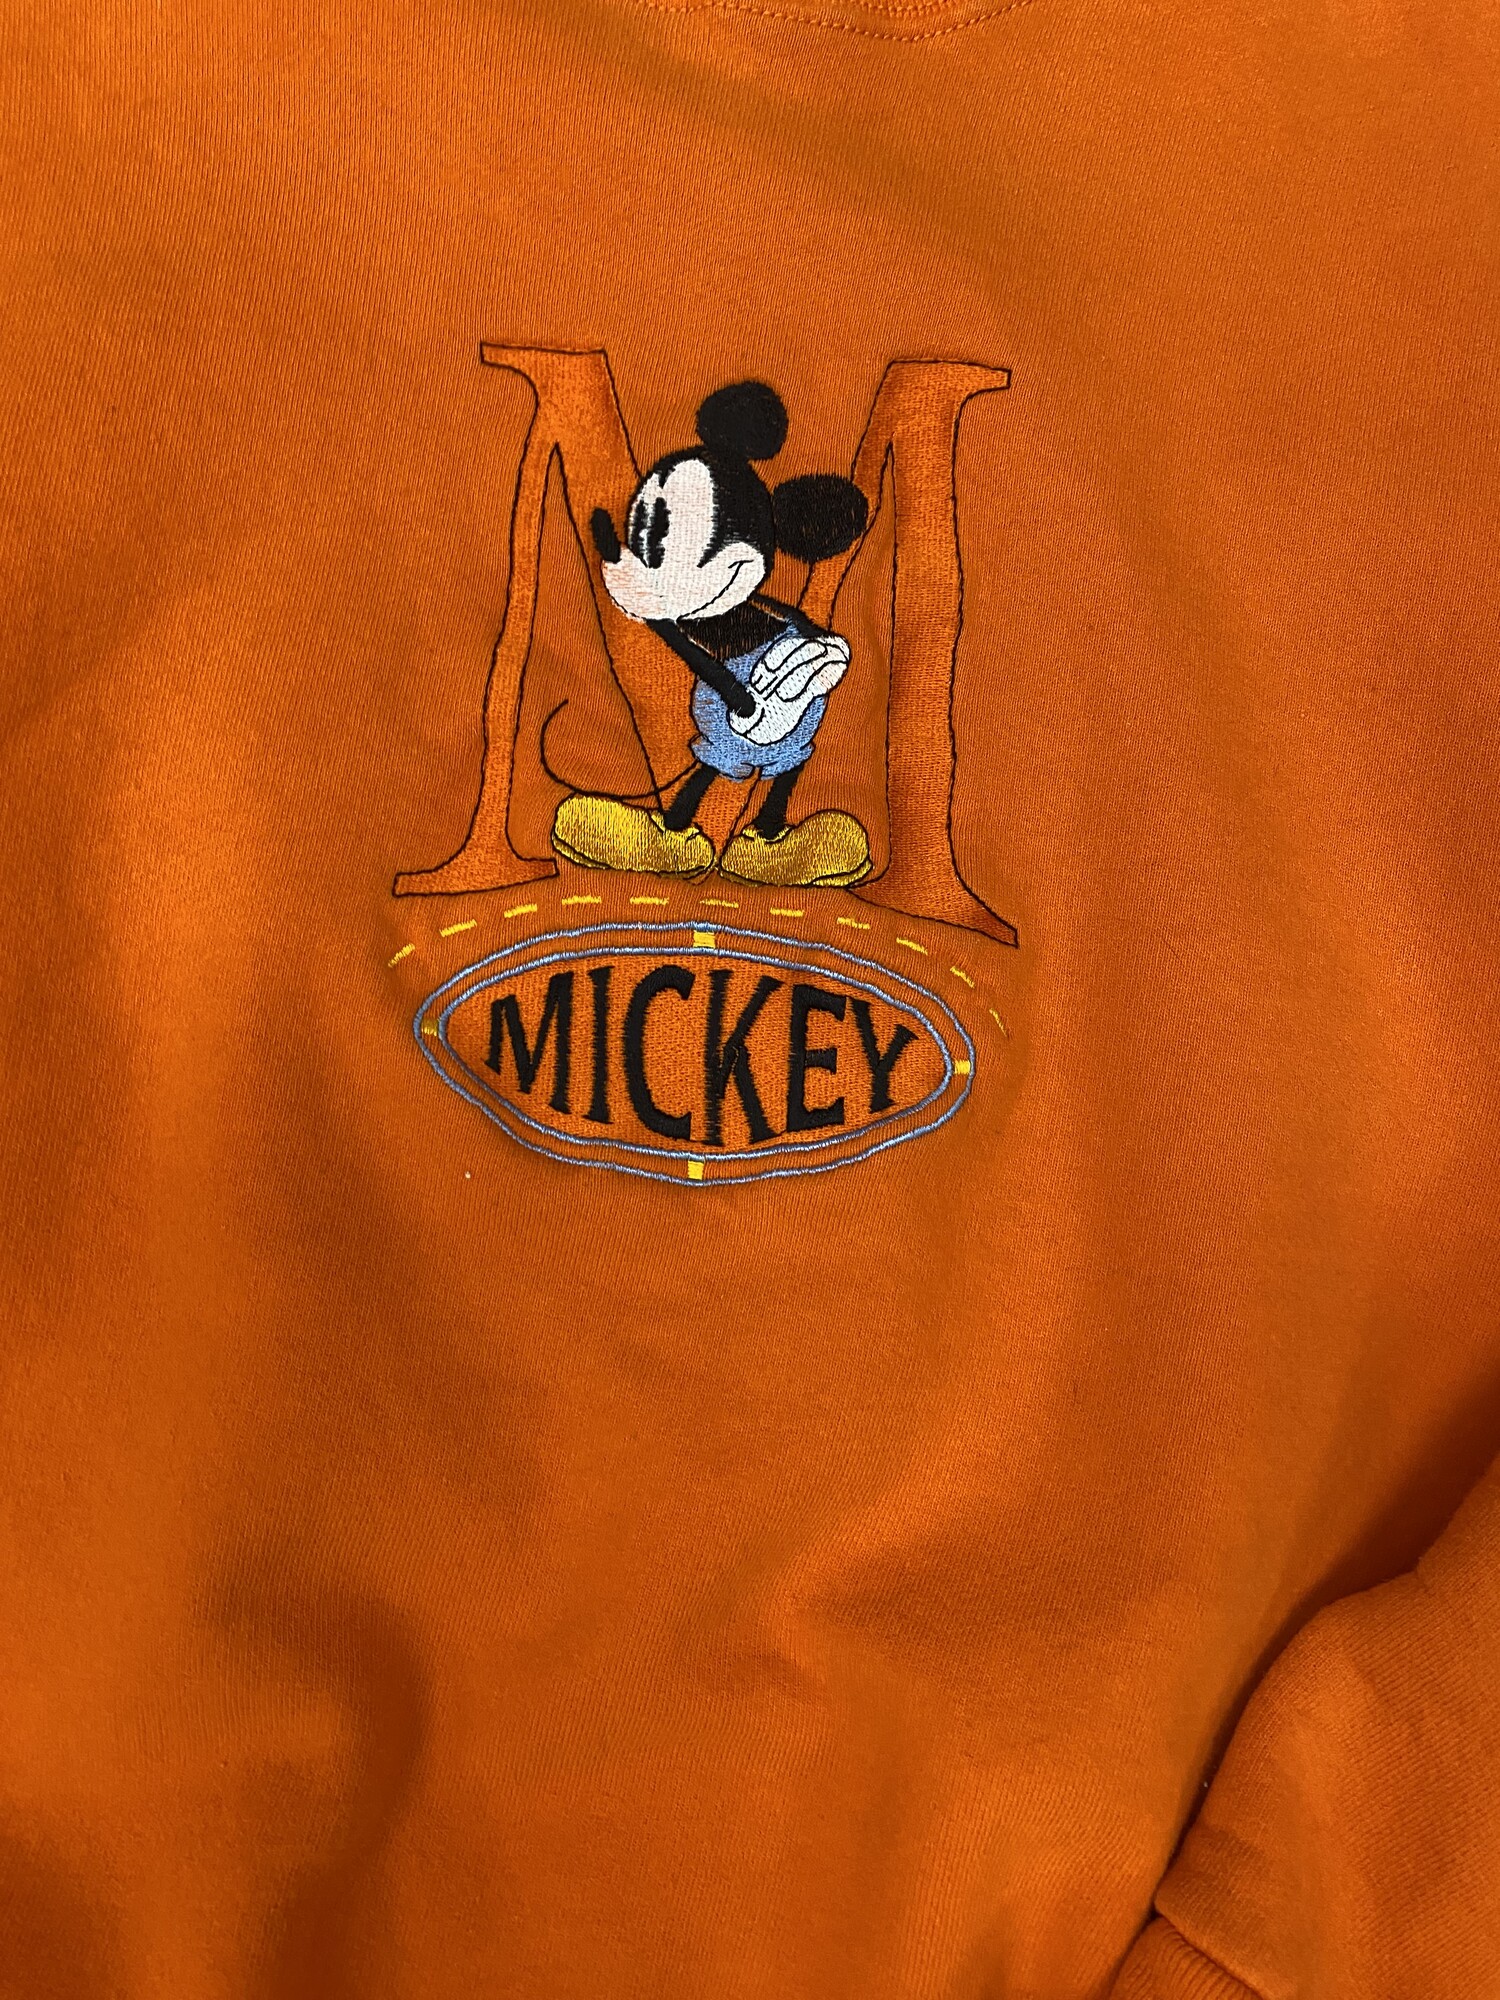 Mickey Mouse | Black Cat Clothing Co.